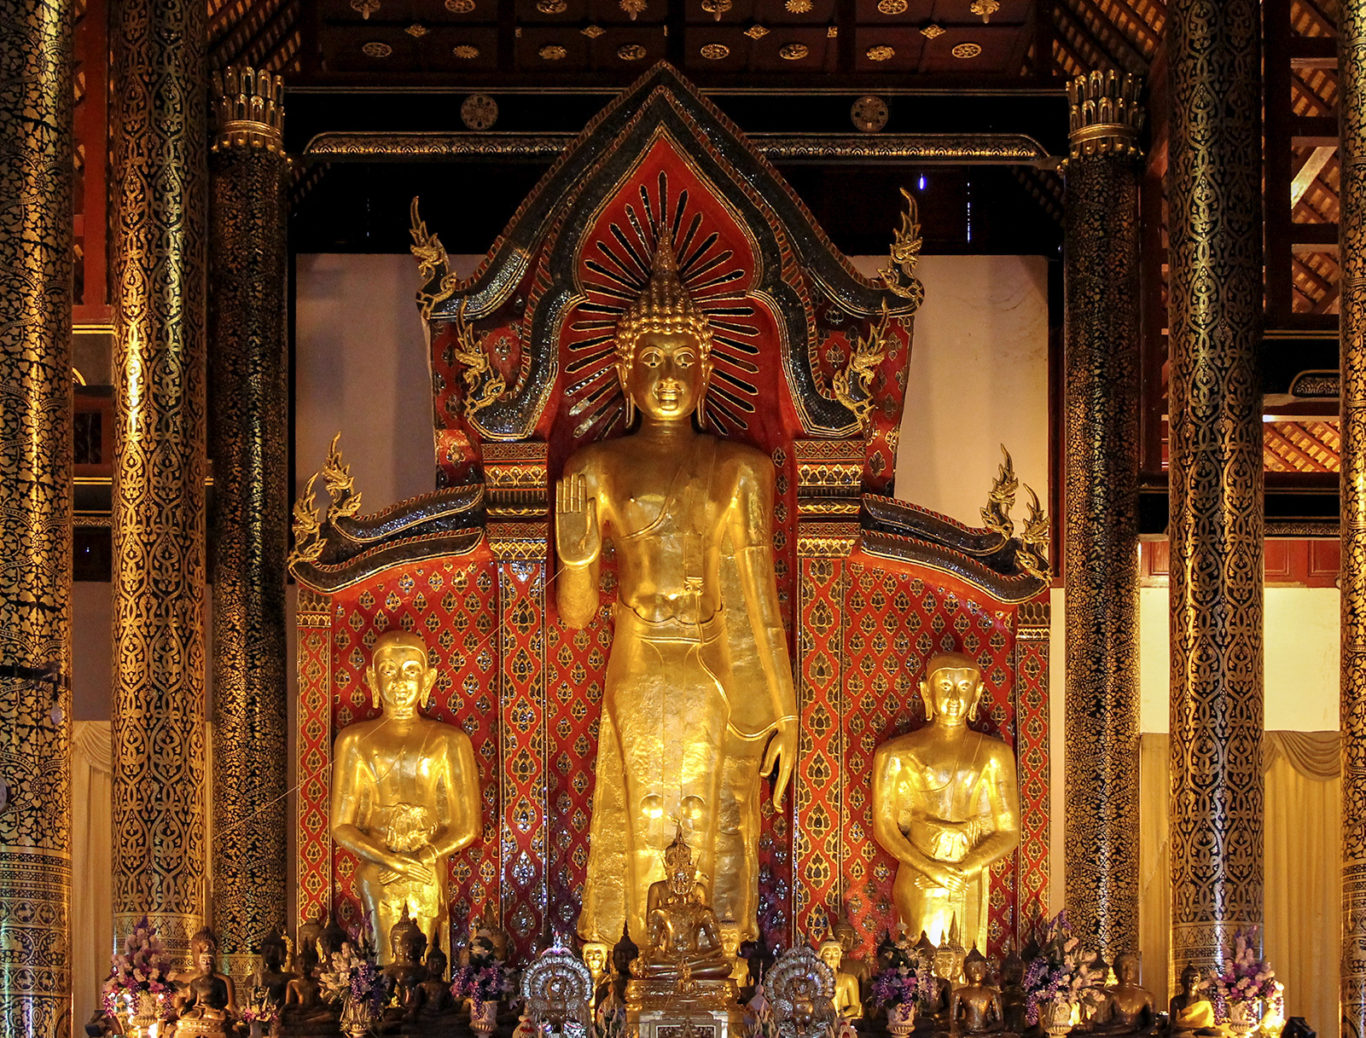 statues of sariputra and maudgalyayana flanking the buddha